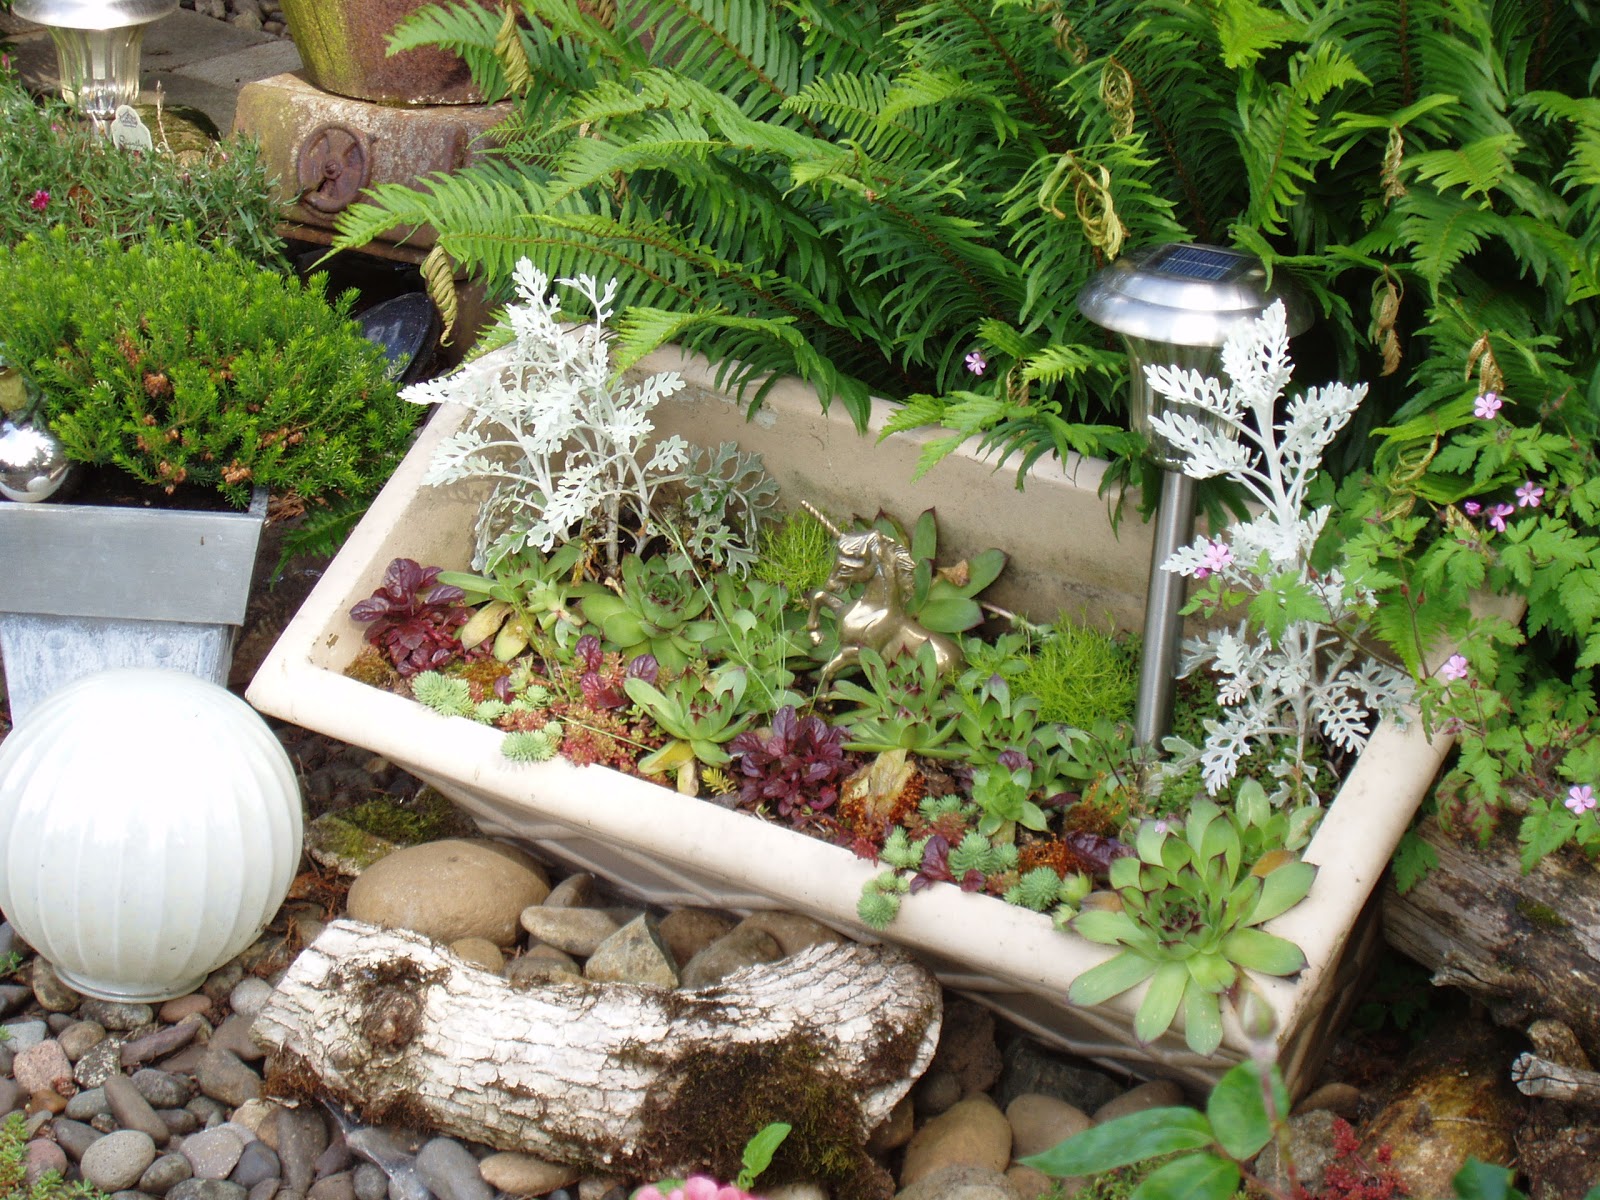 Refreshing Home: Some Nifty Yard and Garden Ideas